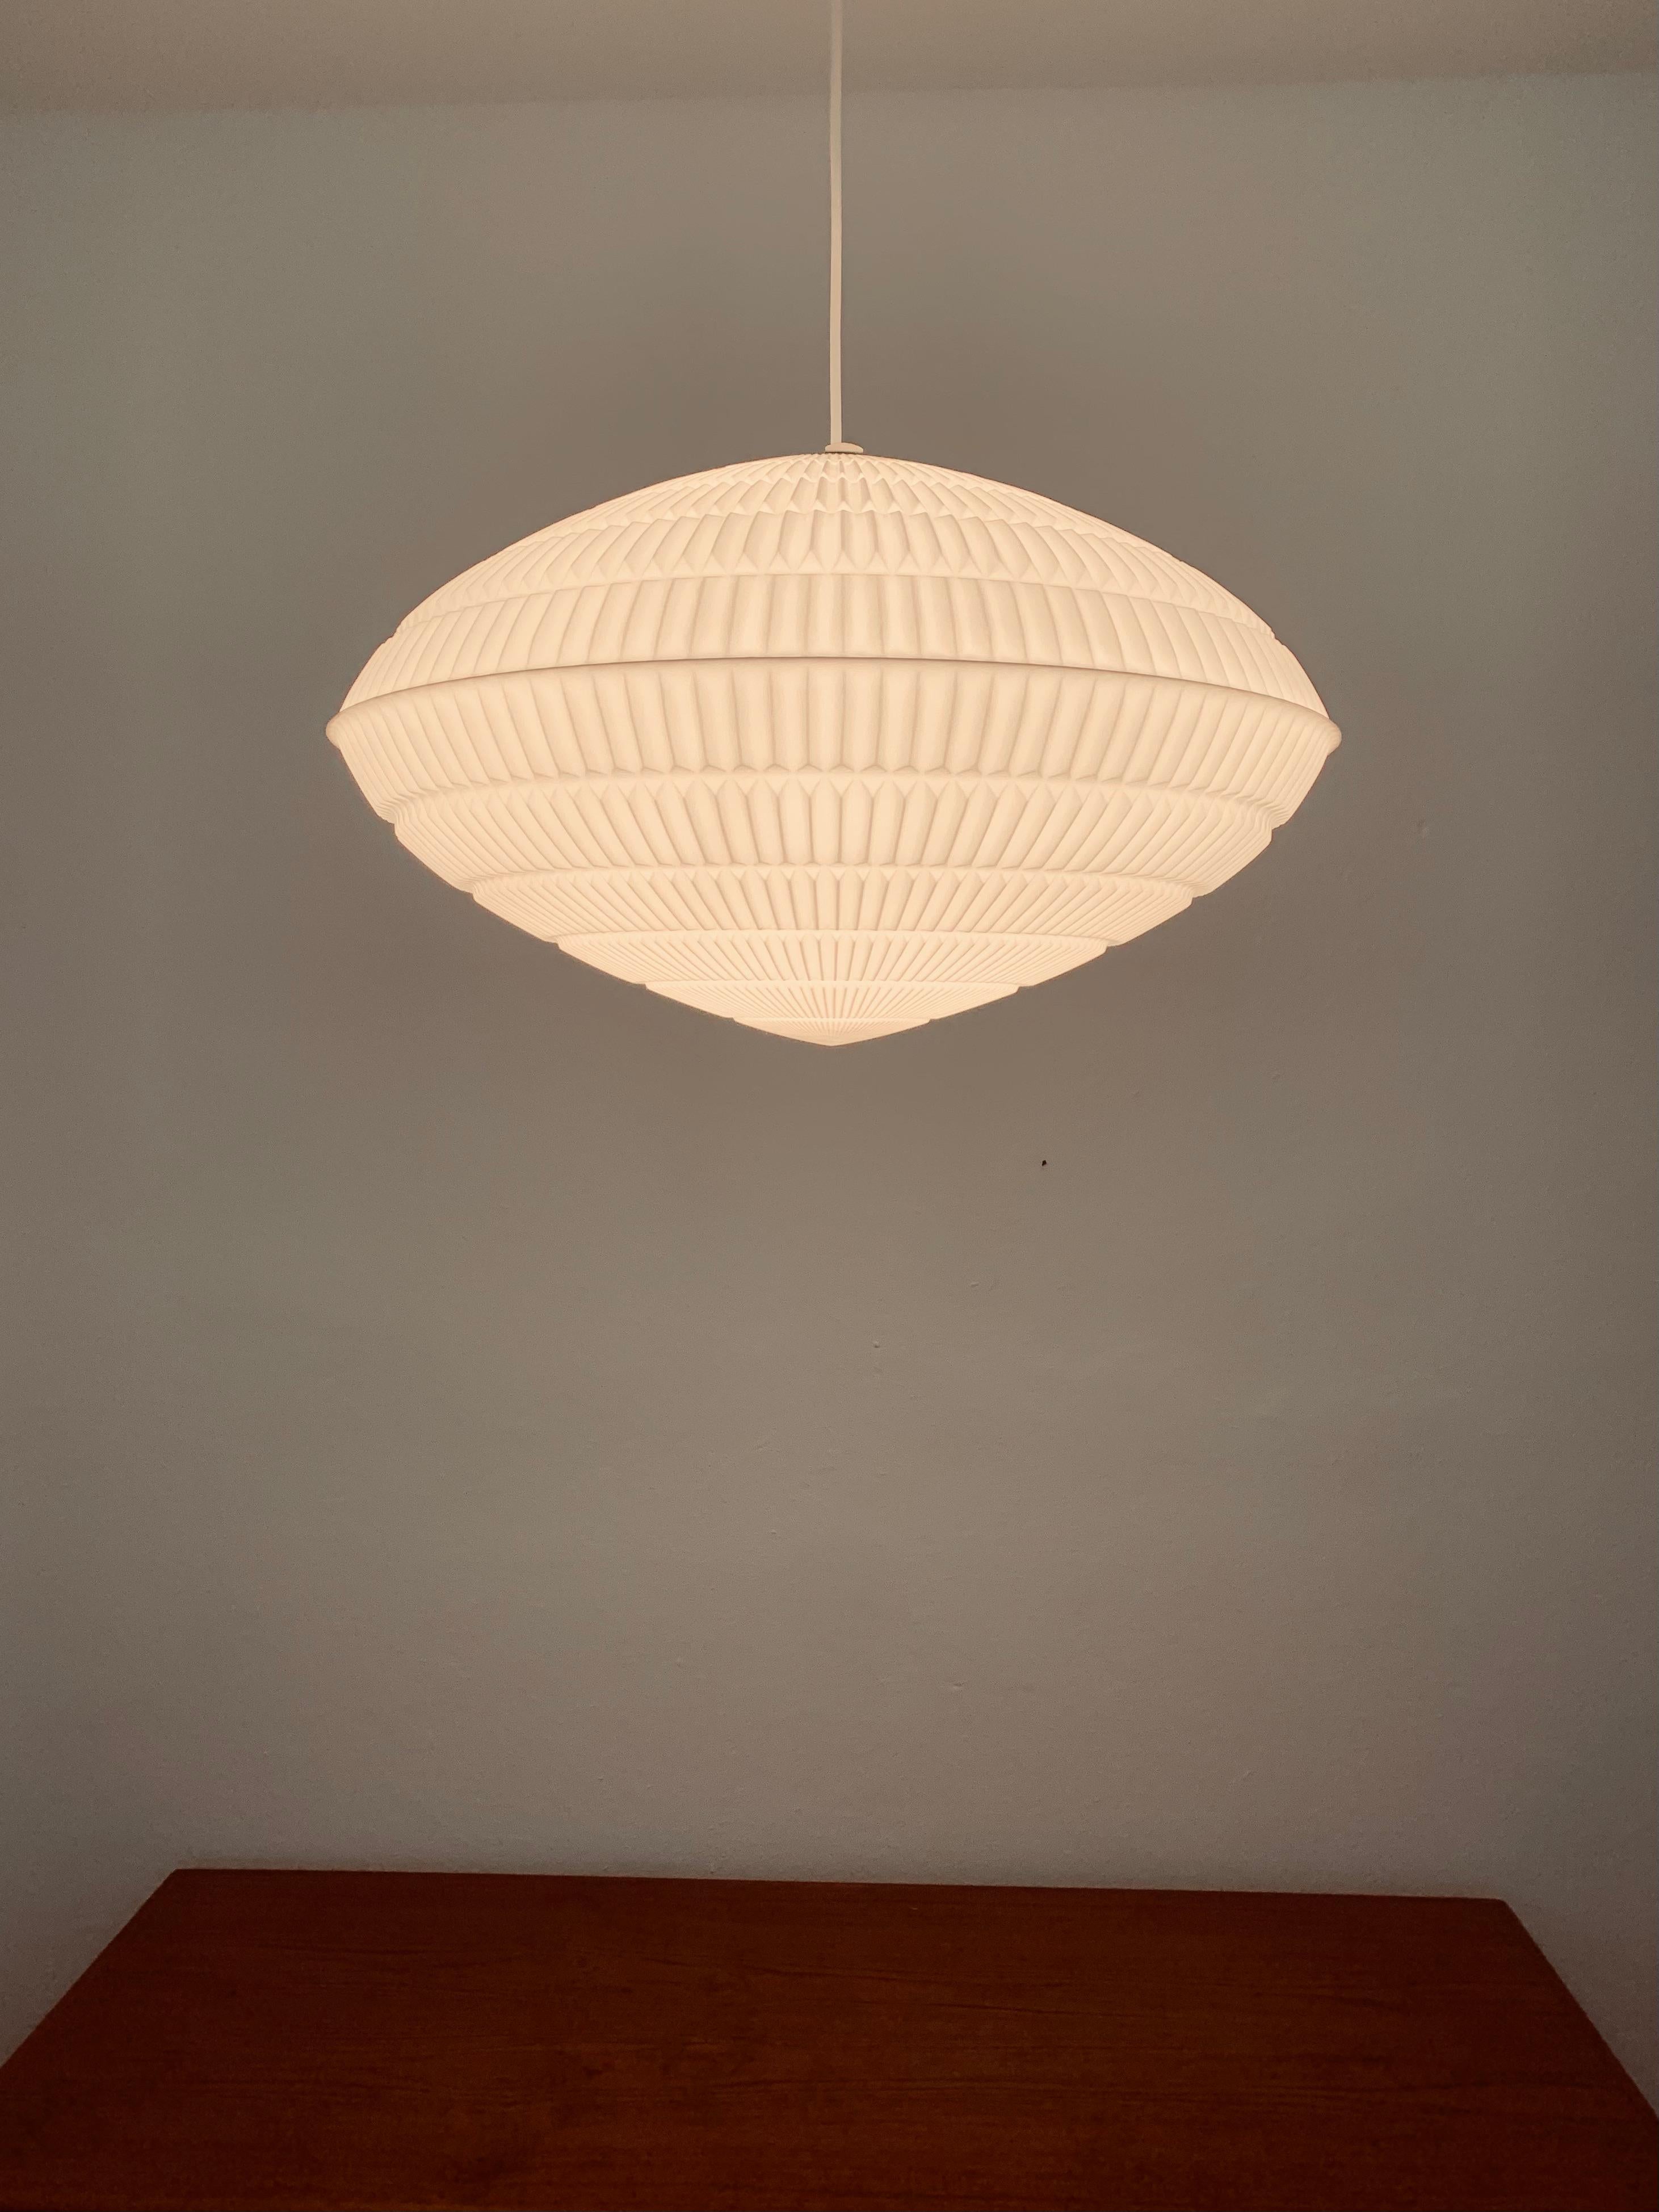  Origami pendant lamp by Aloys Gangkofner for Erco For Sale 2